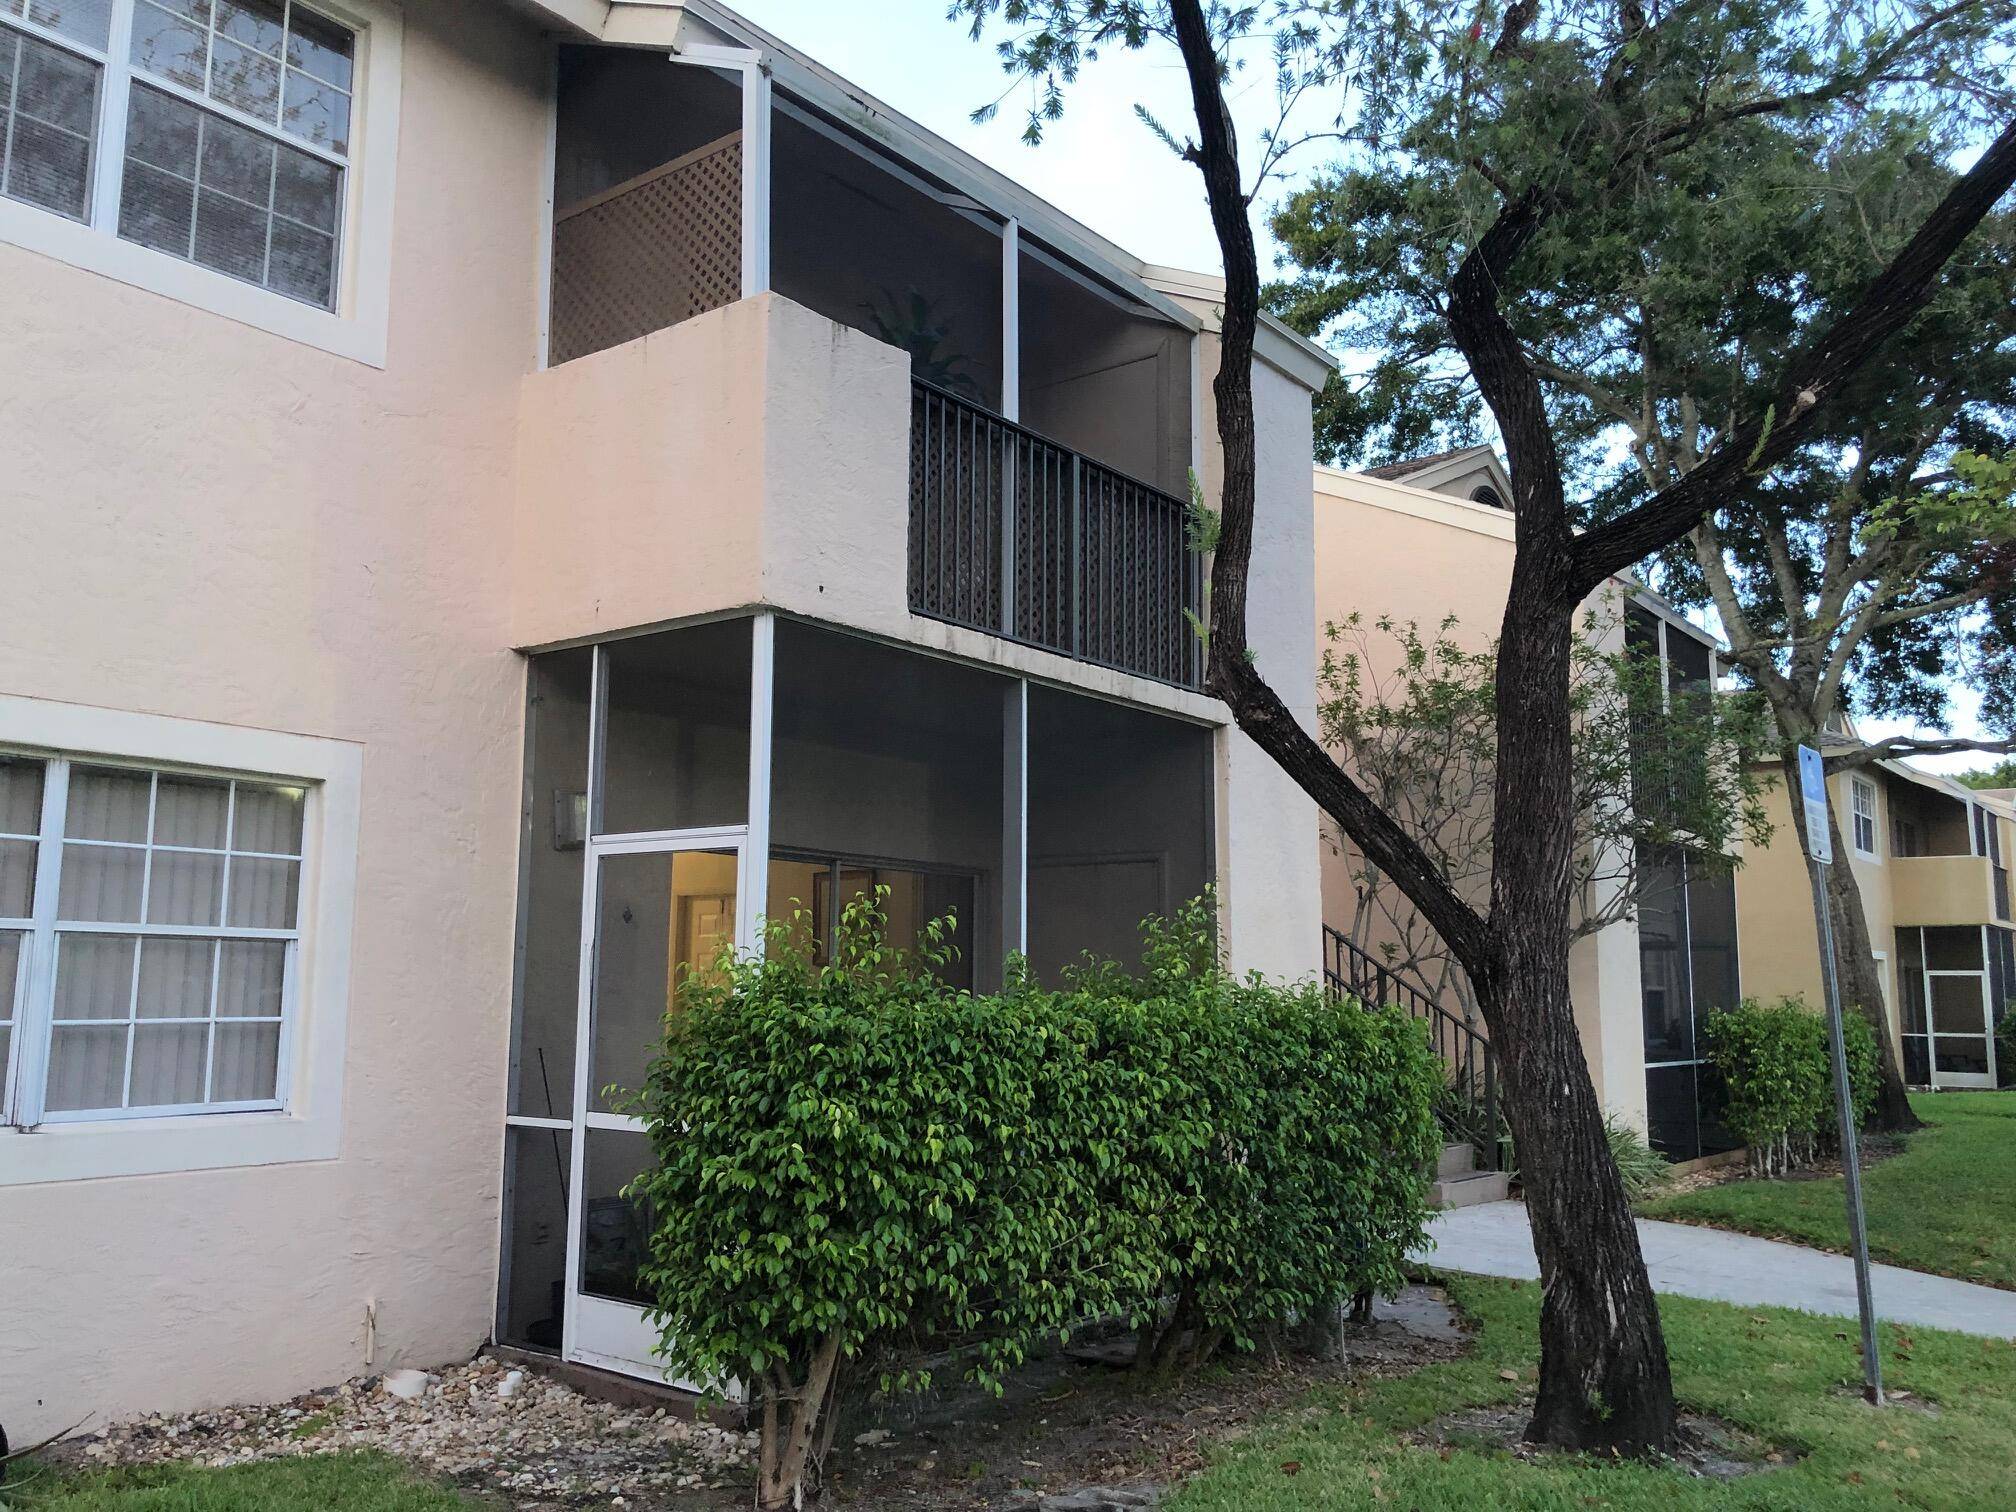 ONE BEDROOM CONDO UNIT IN A GATED ALL AGES COMMUNITY.